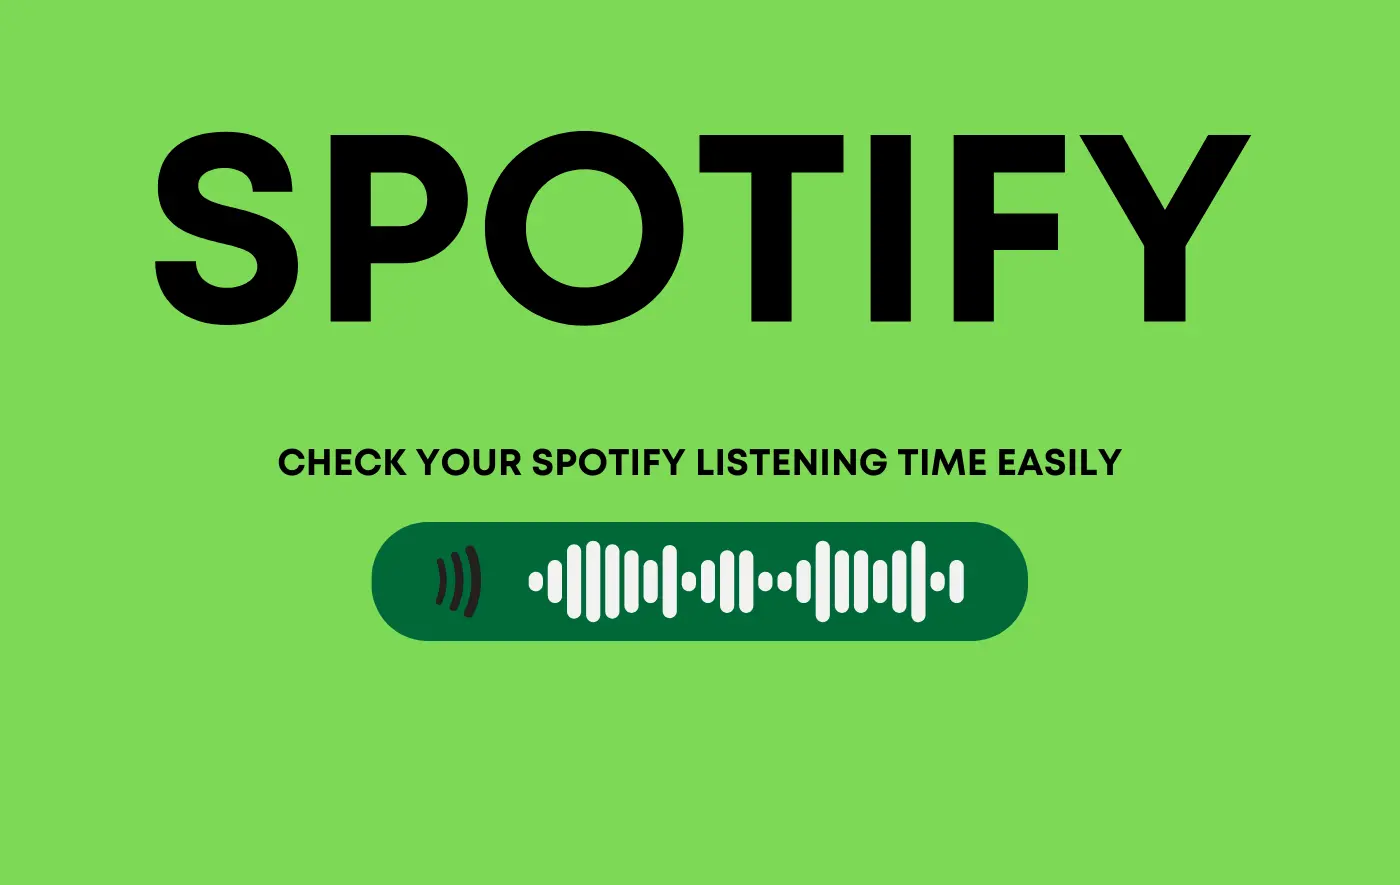 Check Your Spotify Listening Time Easily